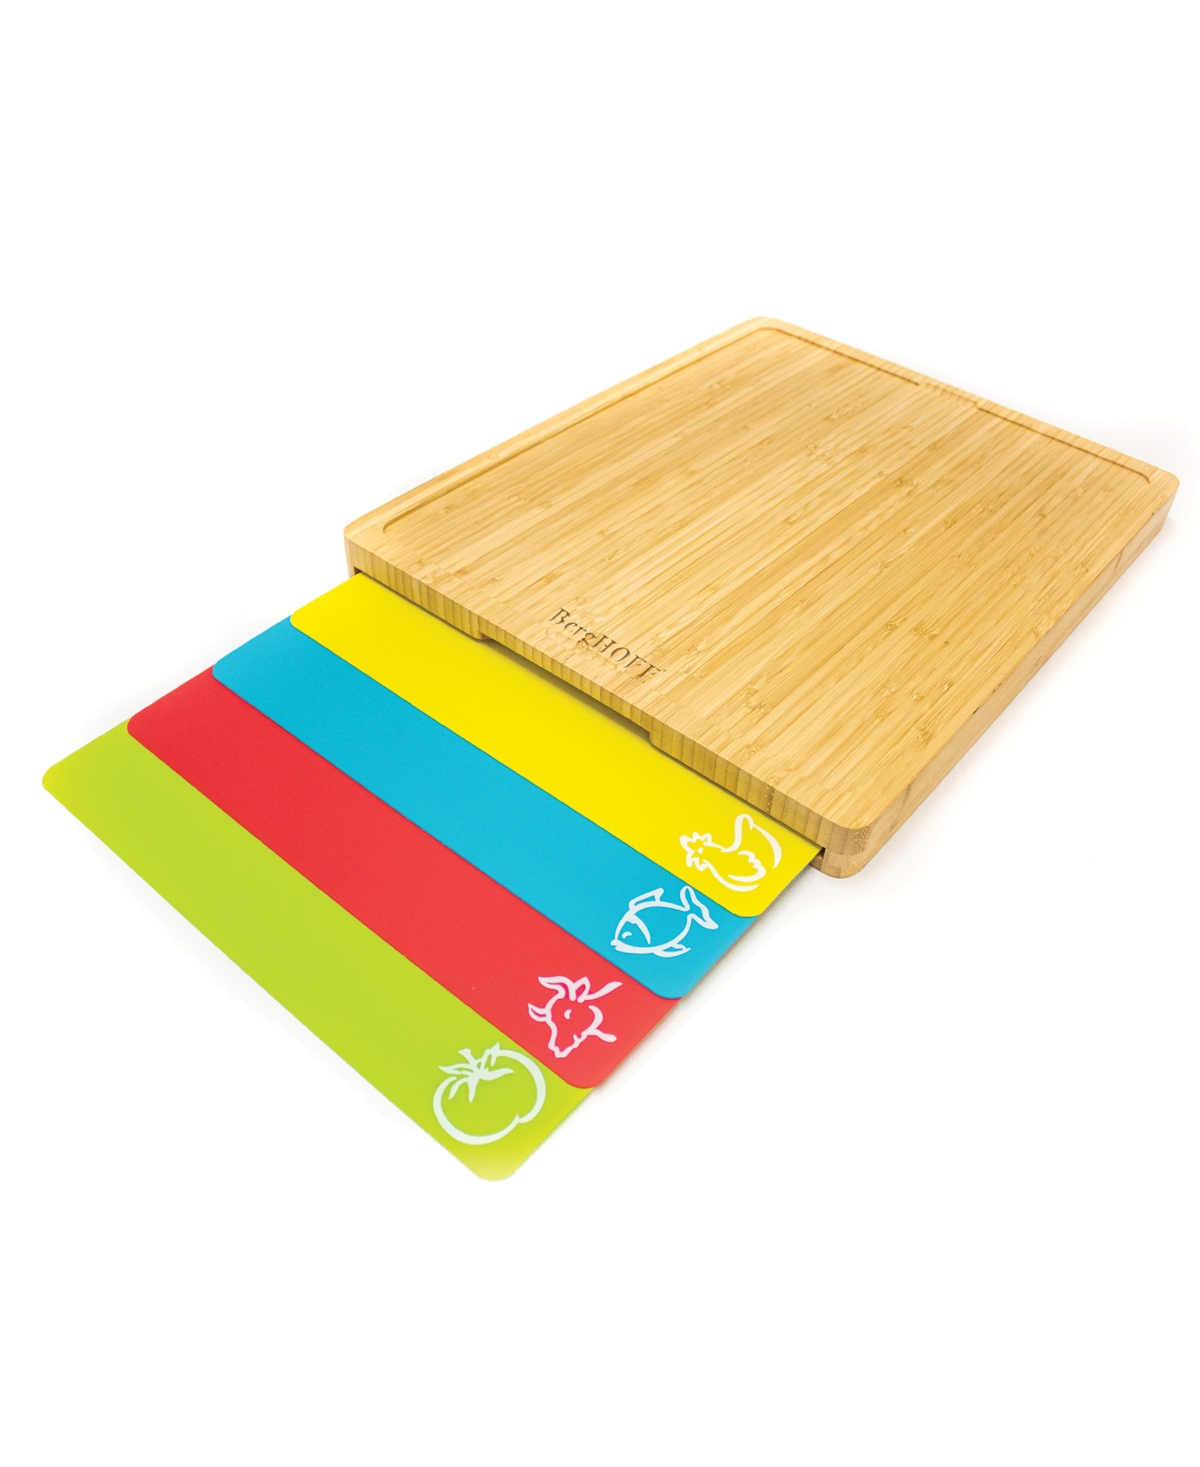 Bamboo Cutting Board and 4 Multi-Colored Inserts Set, 5 Piece